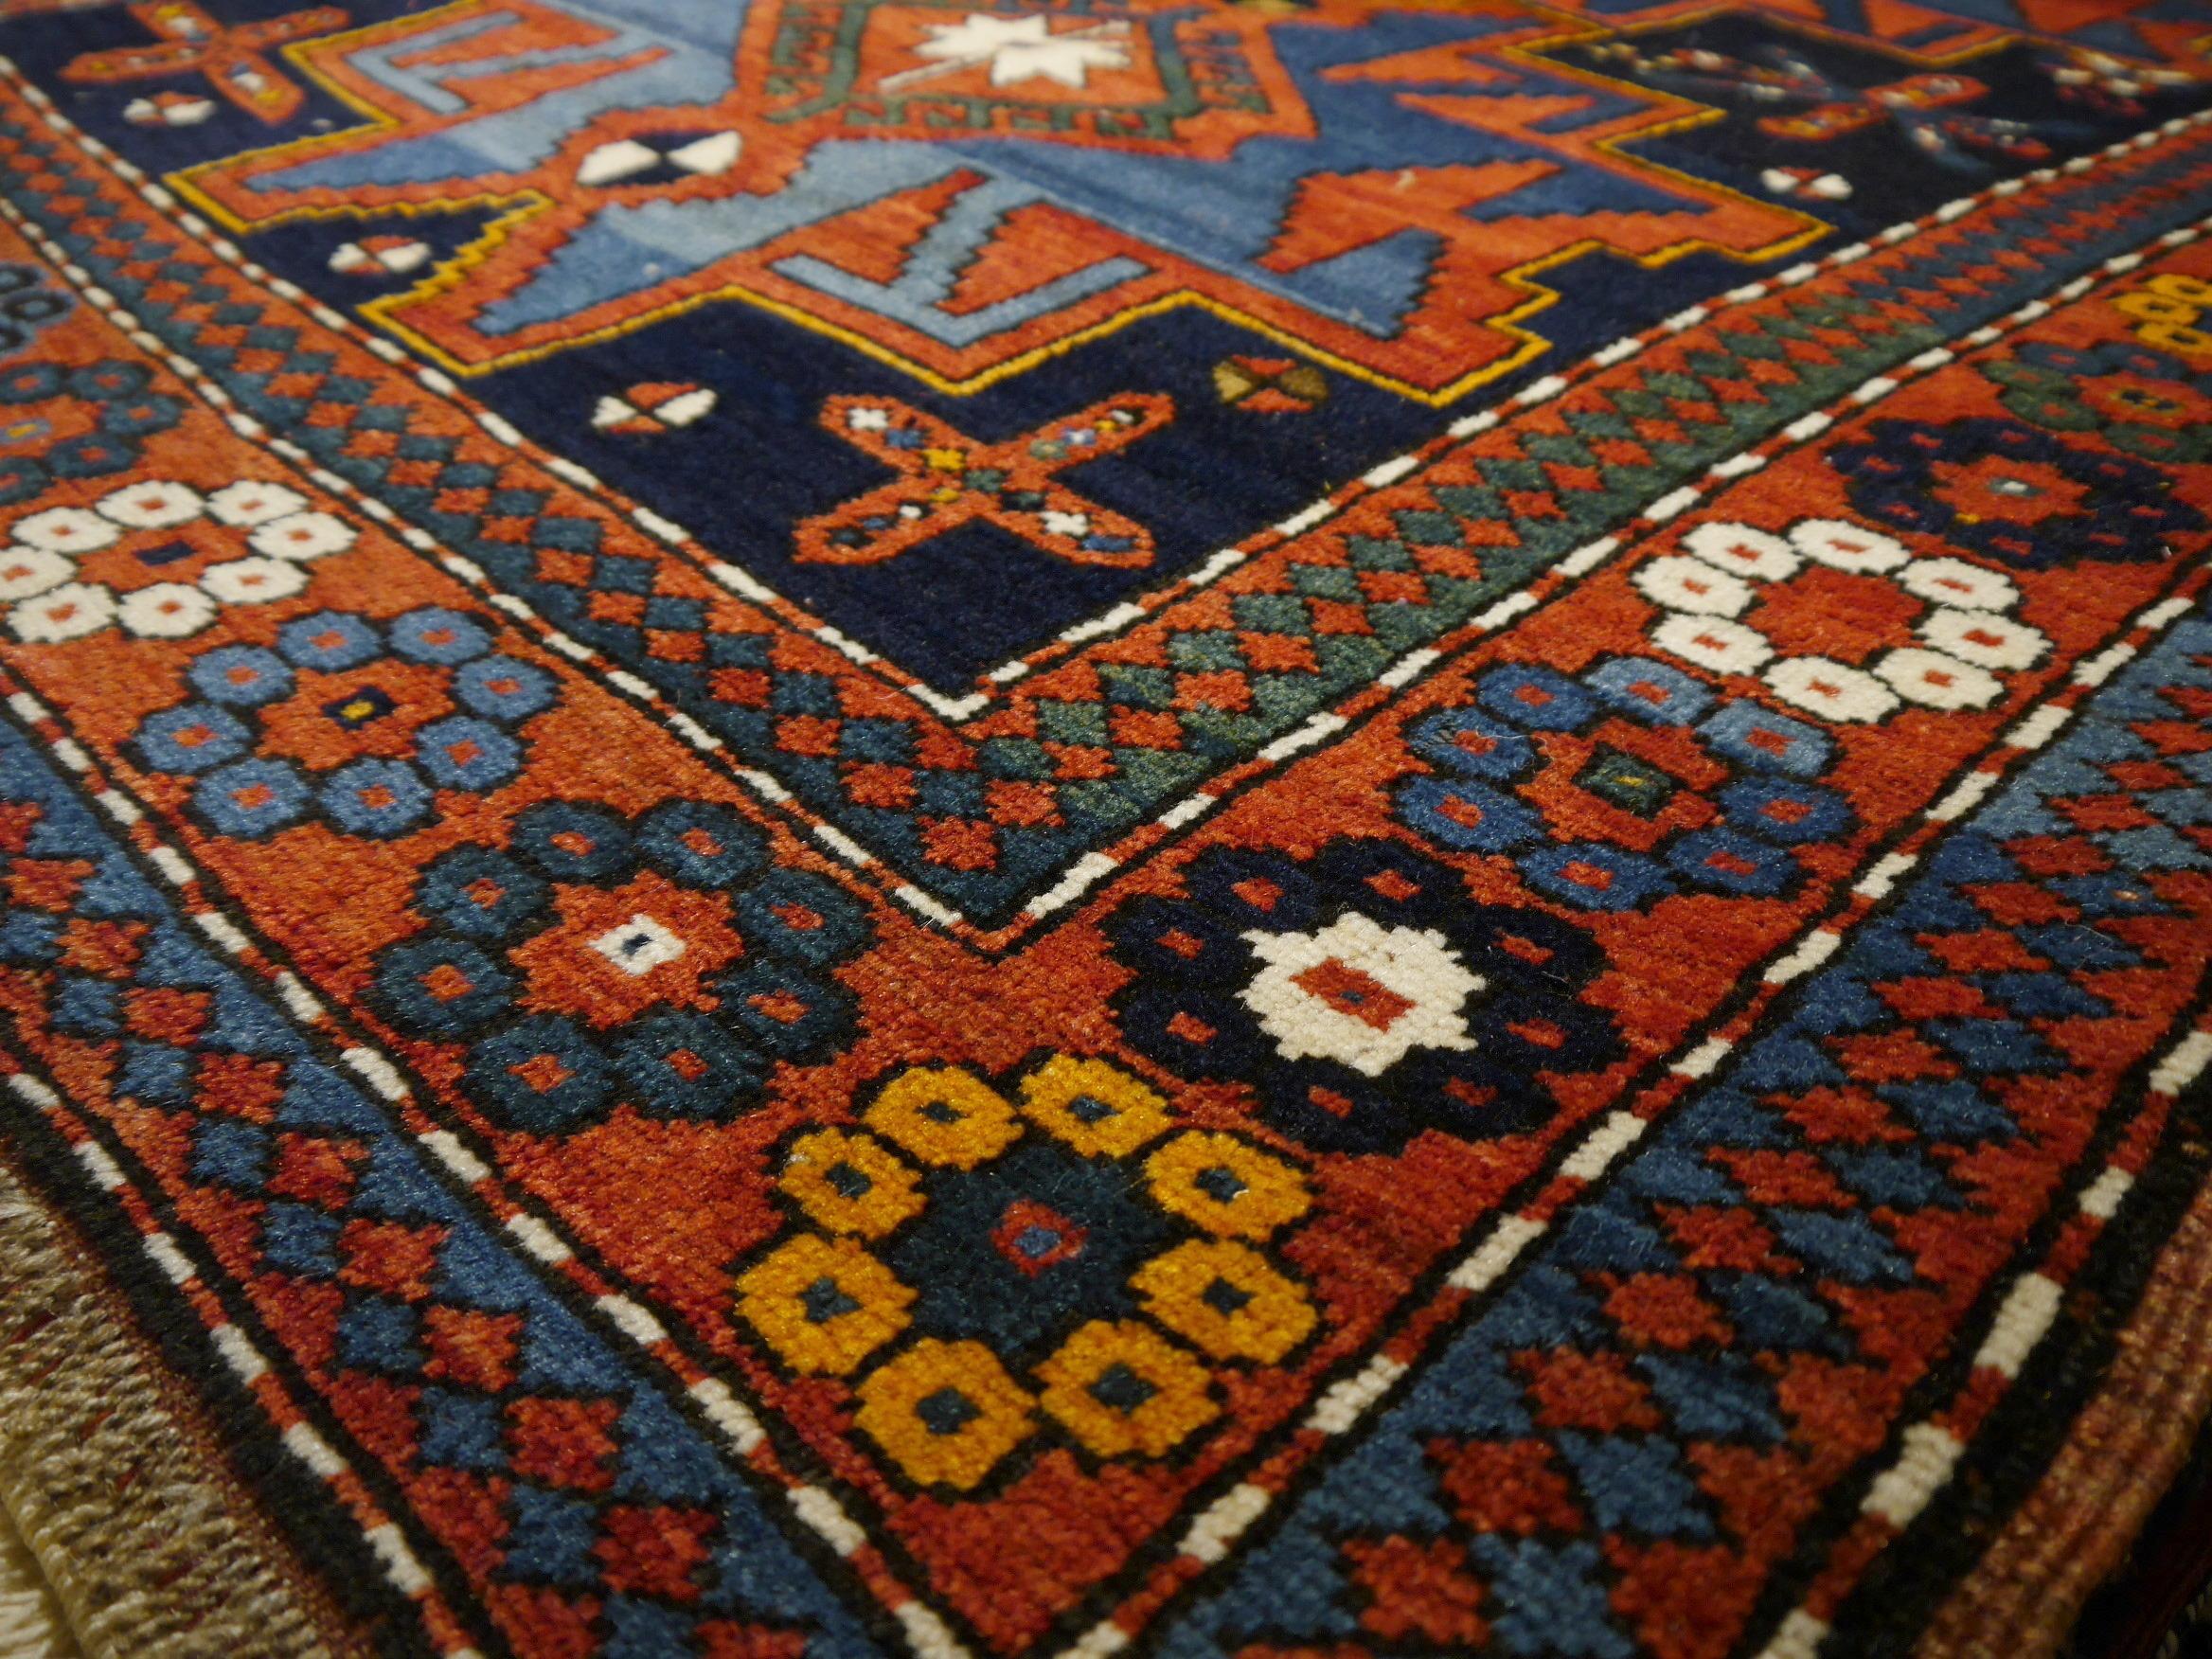 Hand-Knotted Antique Kazak Rug Hand Knotted in Azerbaijan with Vegetable Dyes 